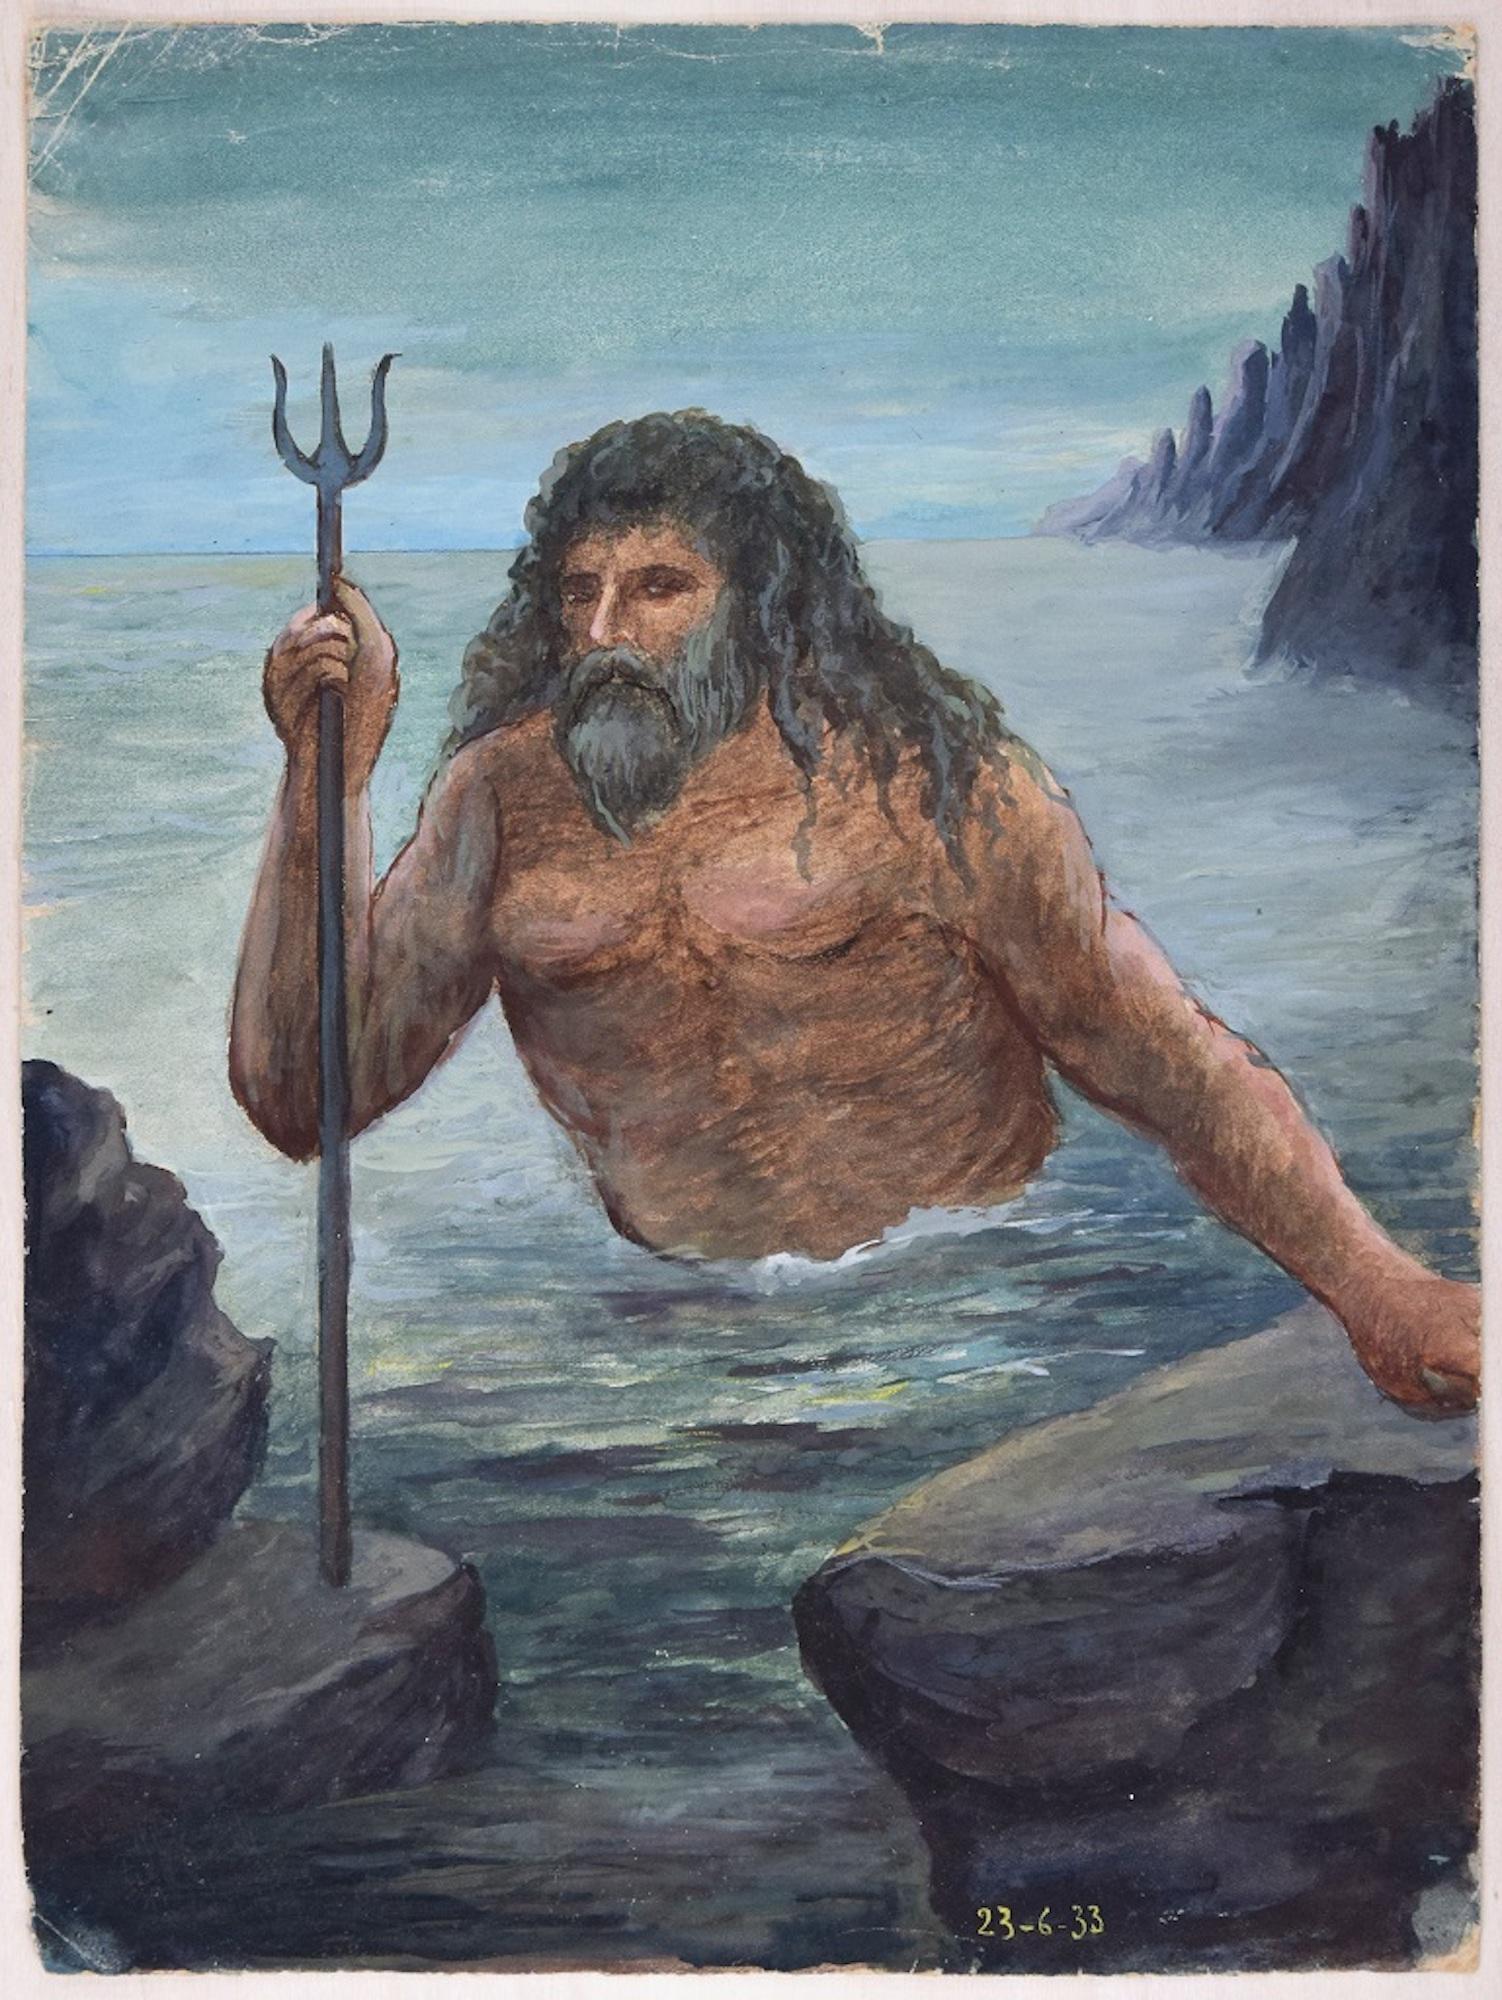 Poseidon  - Ink and Tempera on Paper by Lucie Navier - 1933